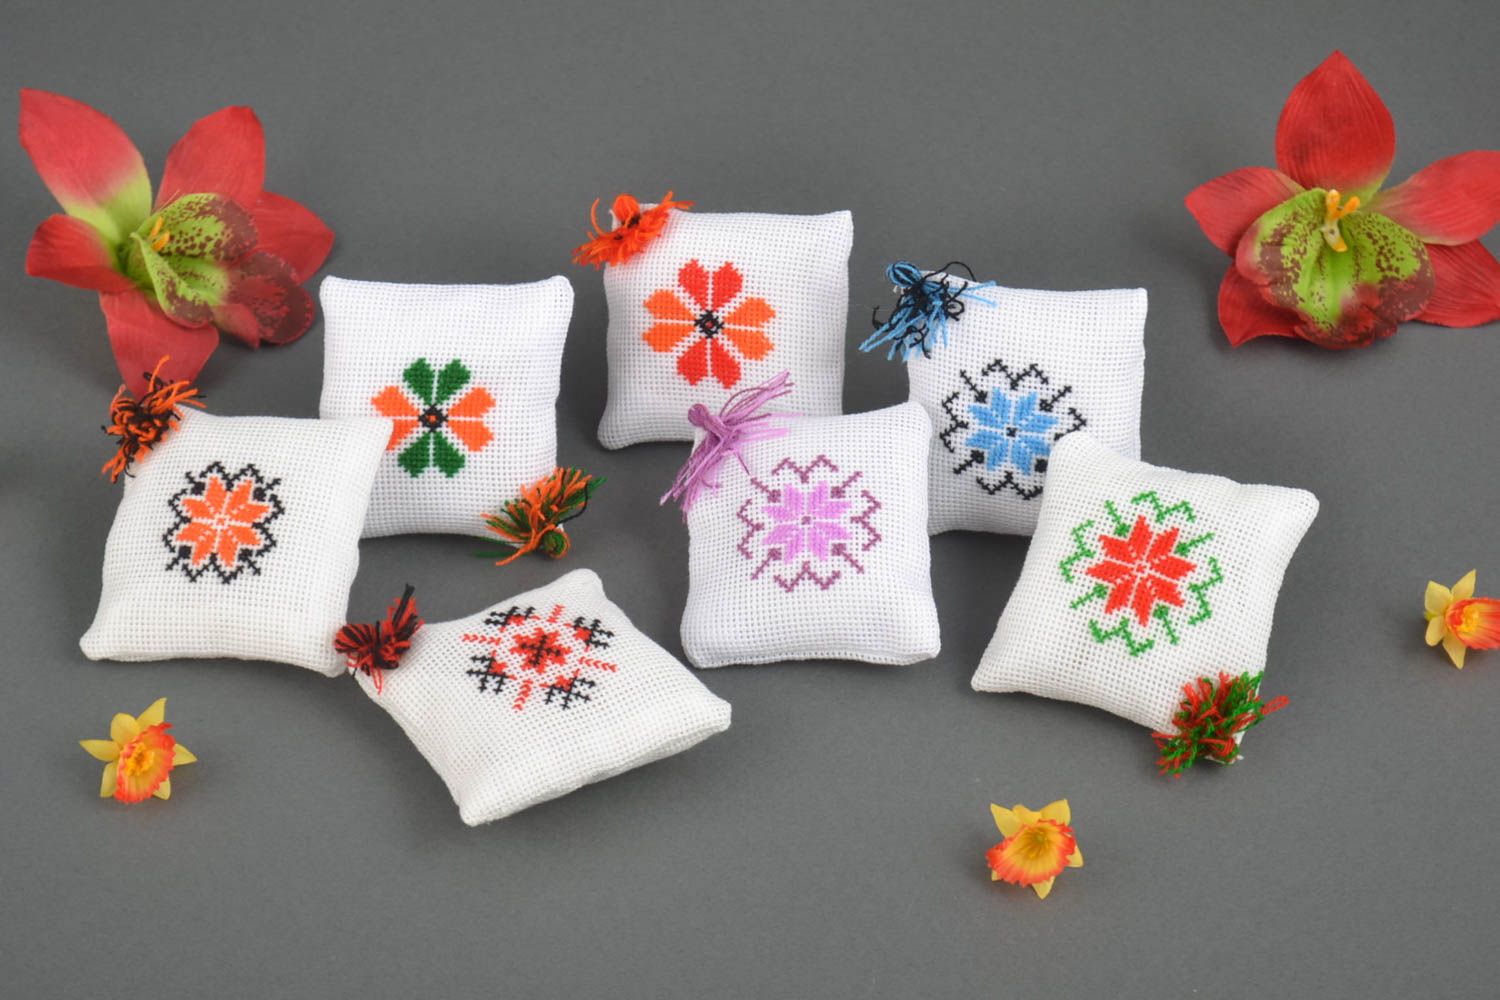 Embroidery kits 7 pin cushions handmade decorations home accents gifts for women photo 1